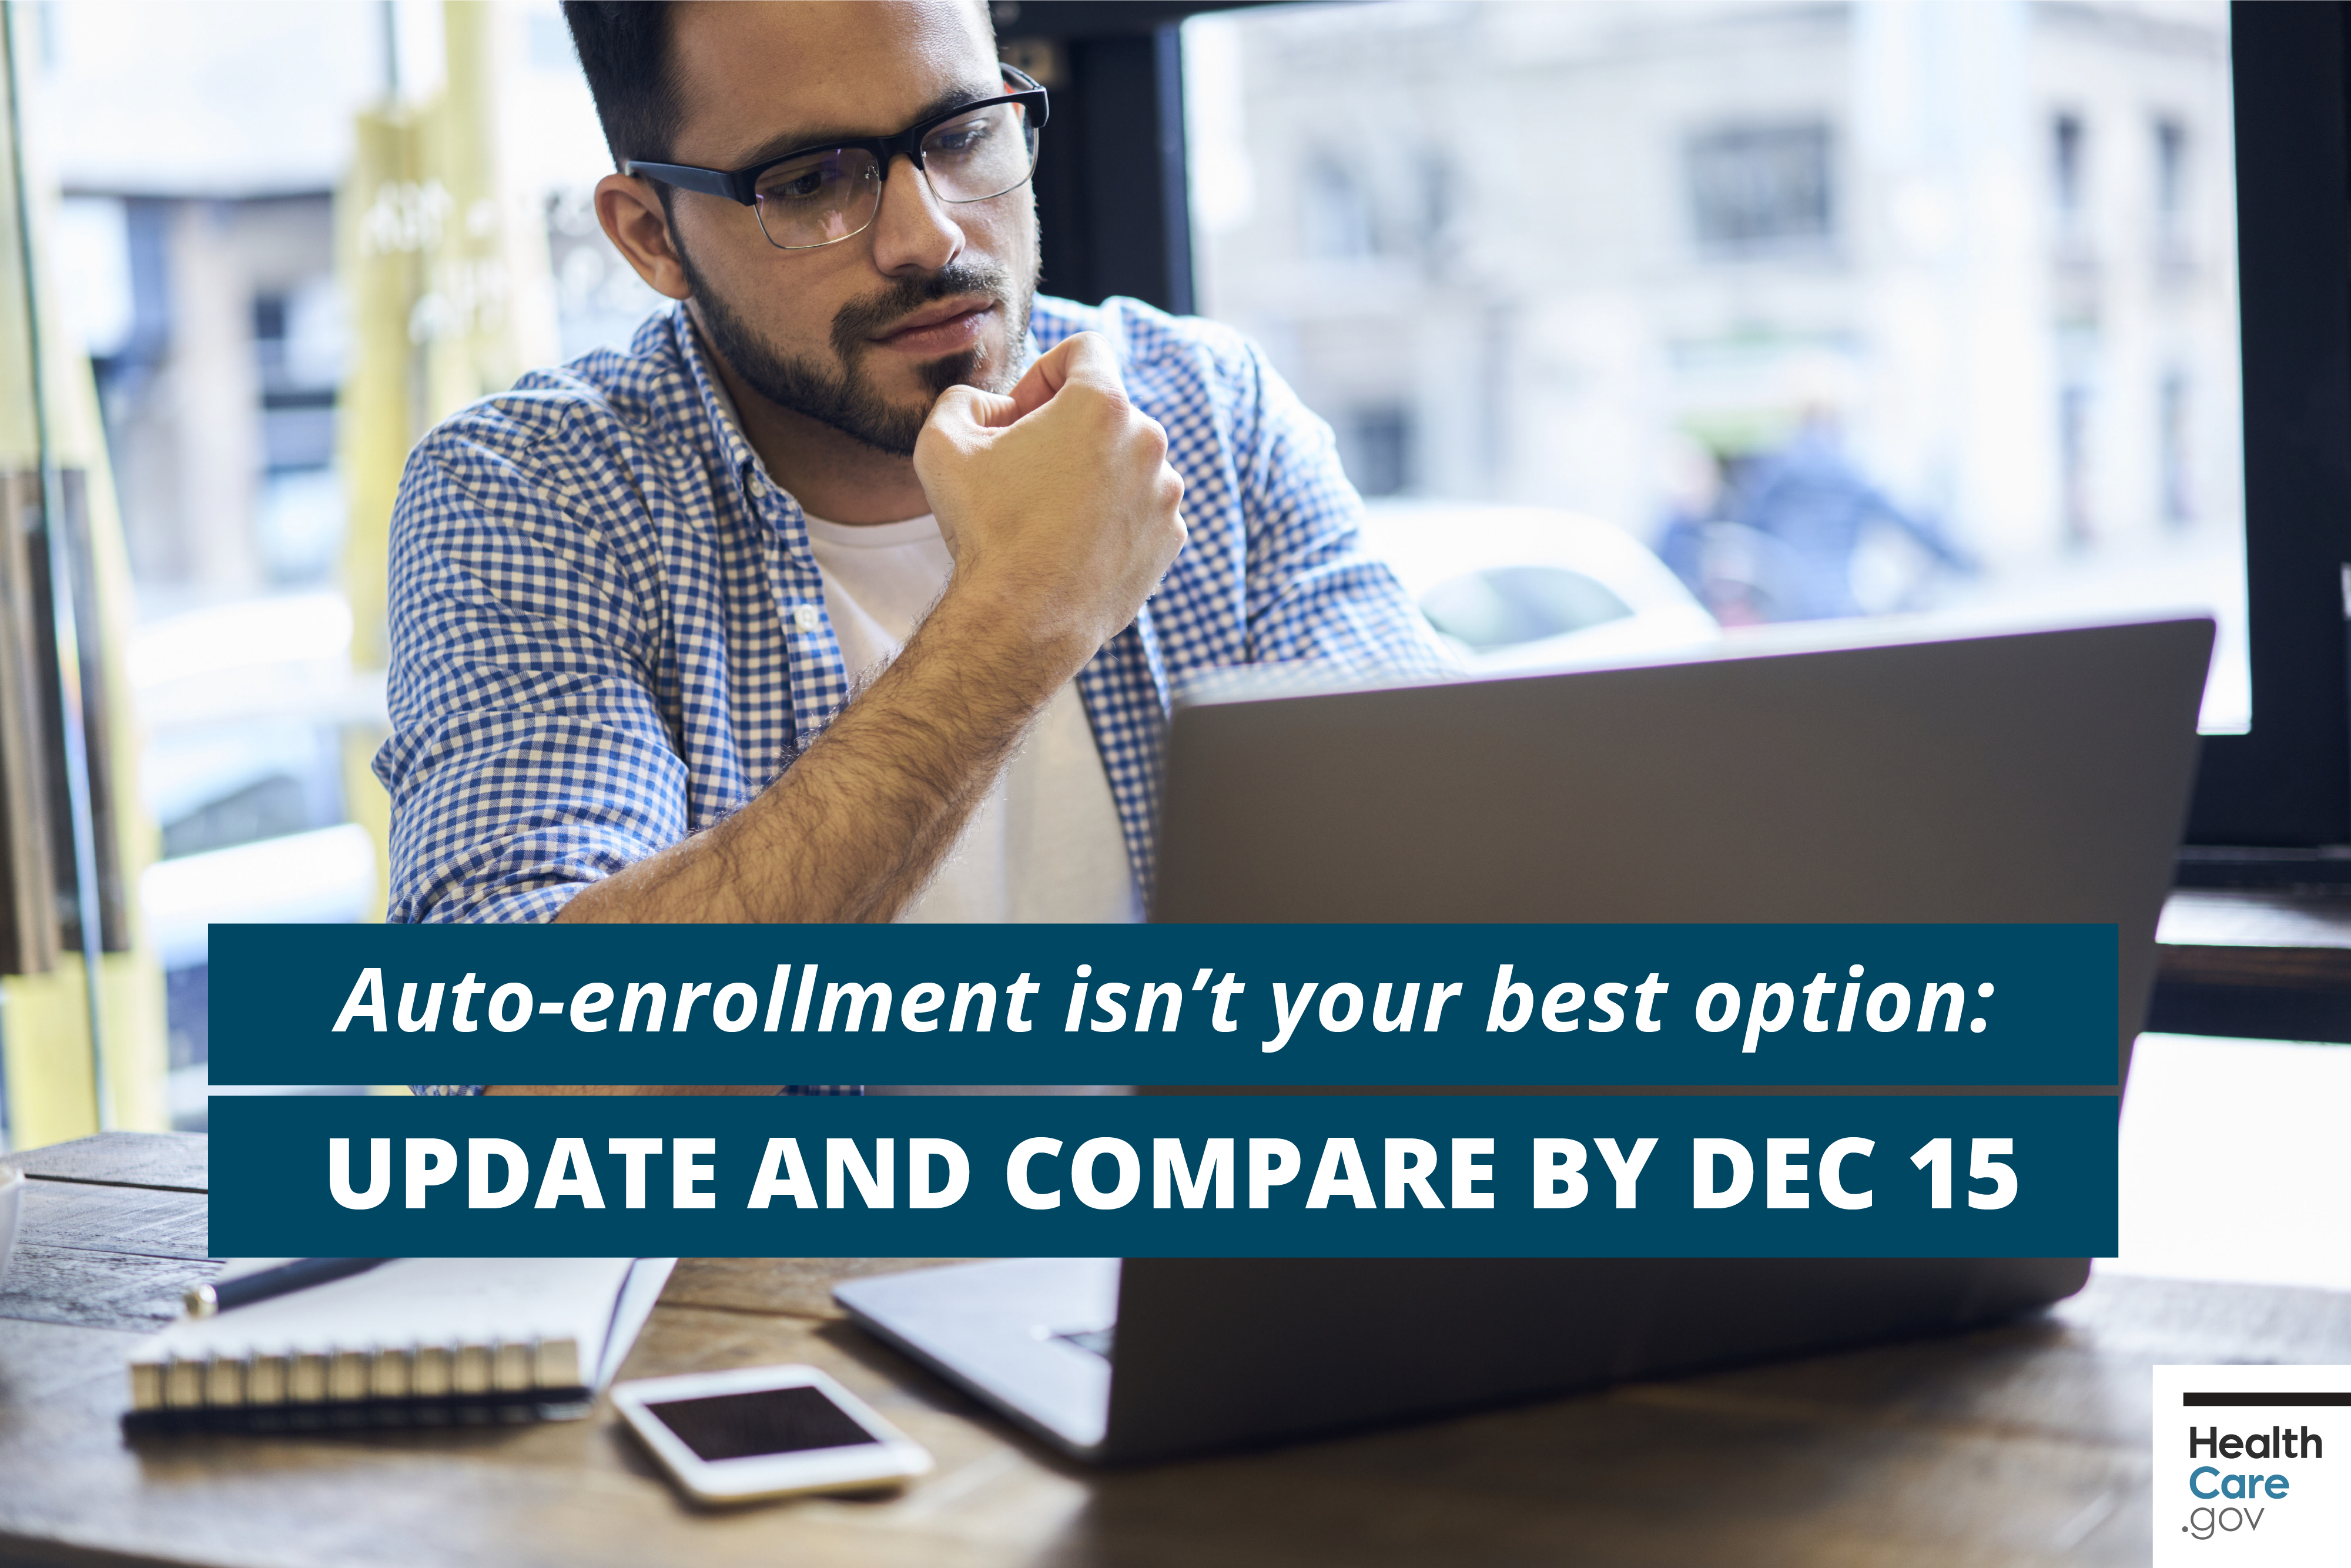 Image: {Auto-enrollment isn’t your best option: Update and compare by Dec. 15}